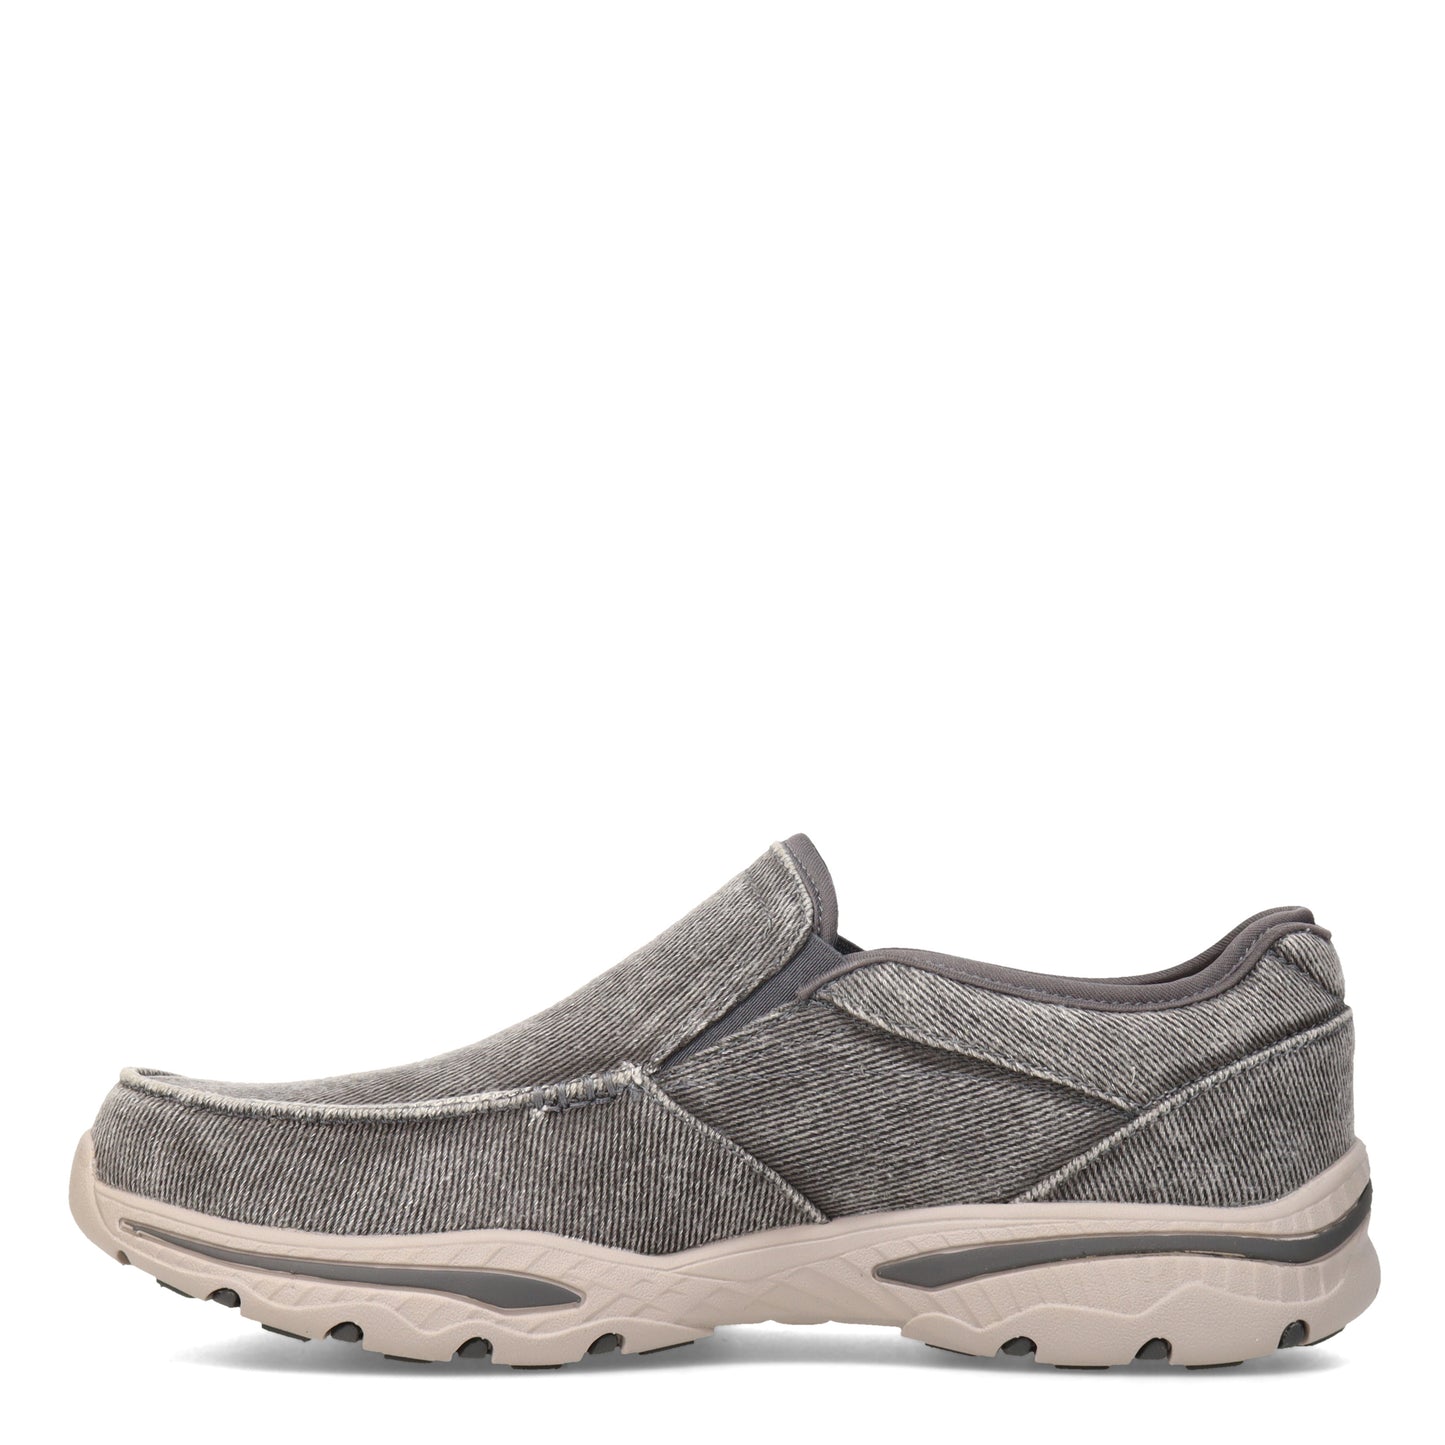 Peltz Shoes  Men's Skechers Relaxed Fit Creston Moseco Slip-On - Wide Width CHARCOAL 65355EWW-CHAR